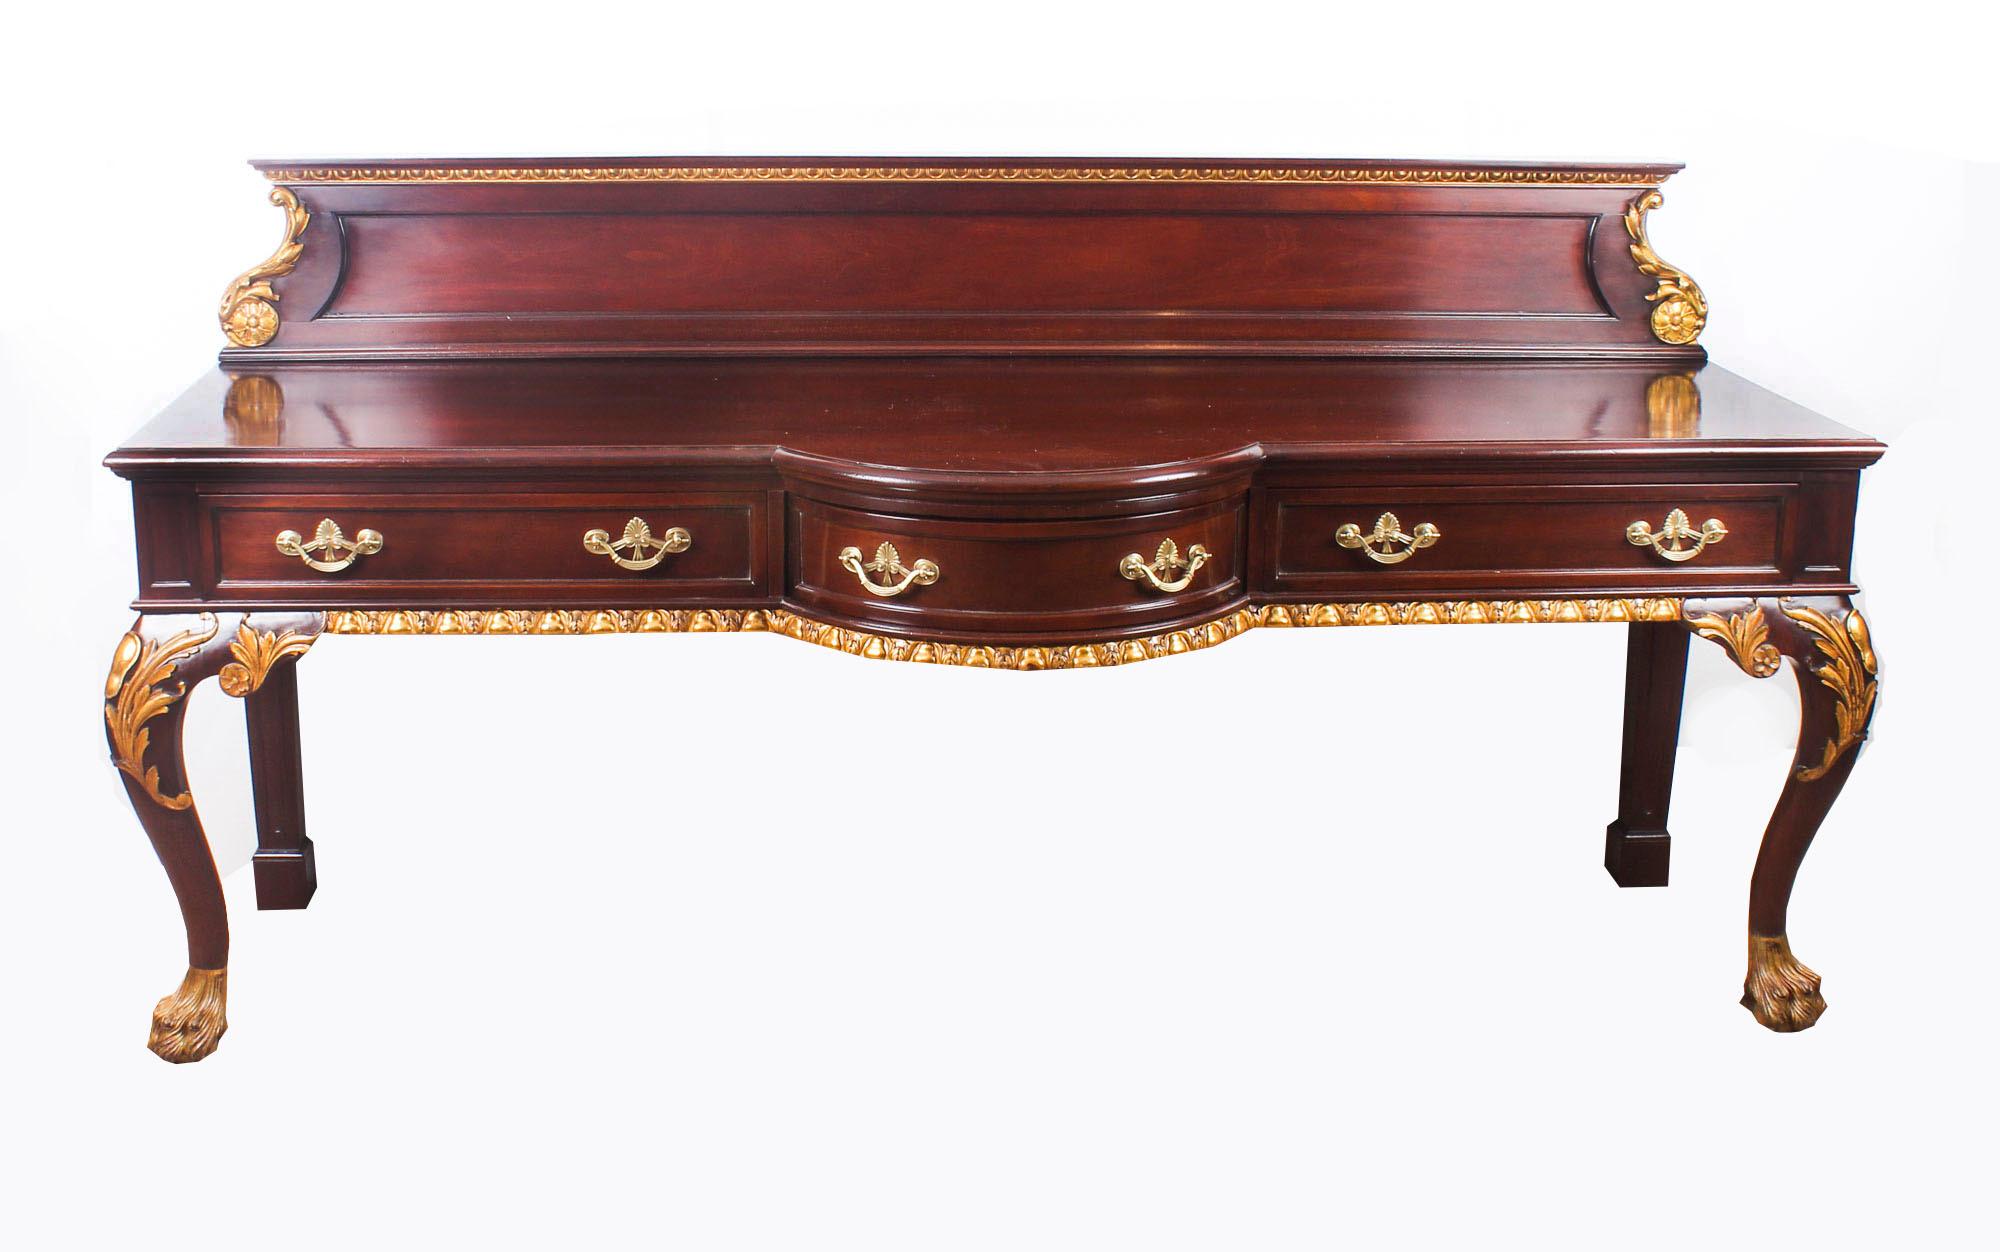 George II Antique Pair of Mahogany and Gilt Serving Tables, 19th Century